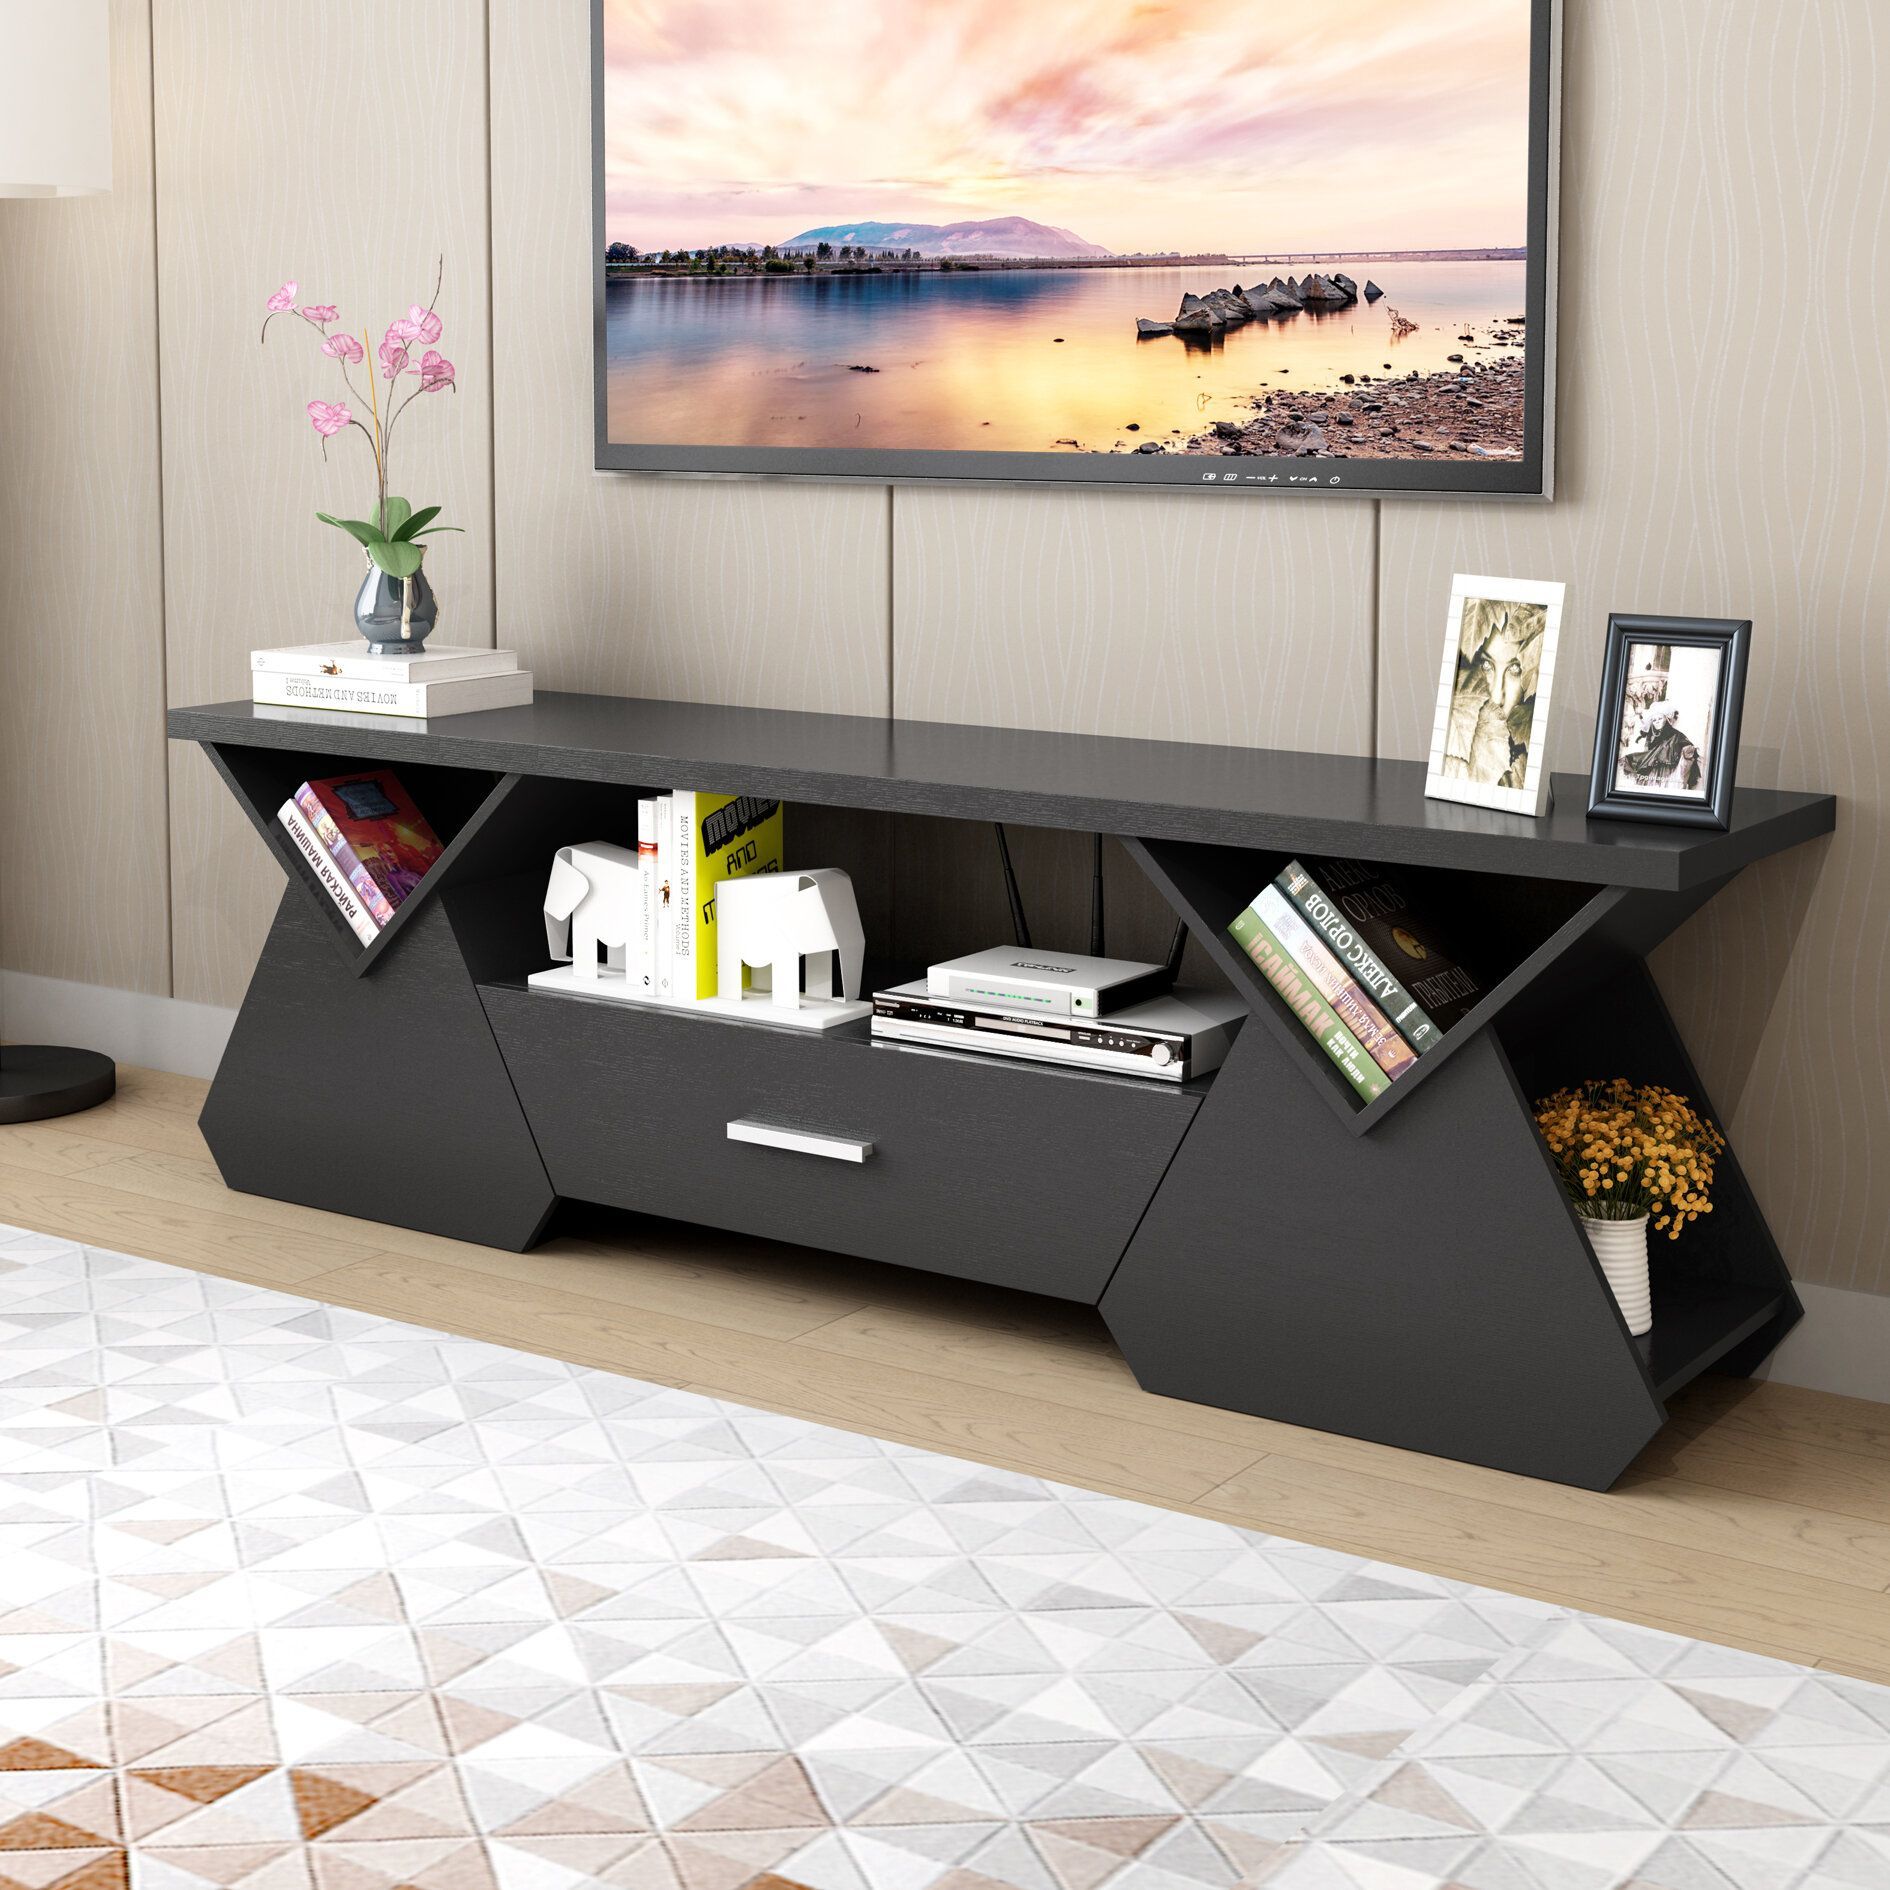 Hedon Tv Stand For Tvs Up To 78" (with Images) | Tv With Ira Tv Stands For Tvs Up To 78" (View 11 of 15)